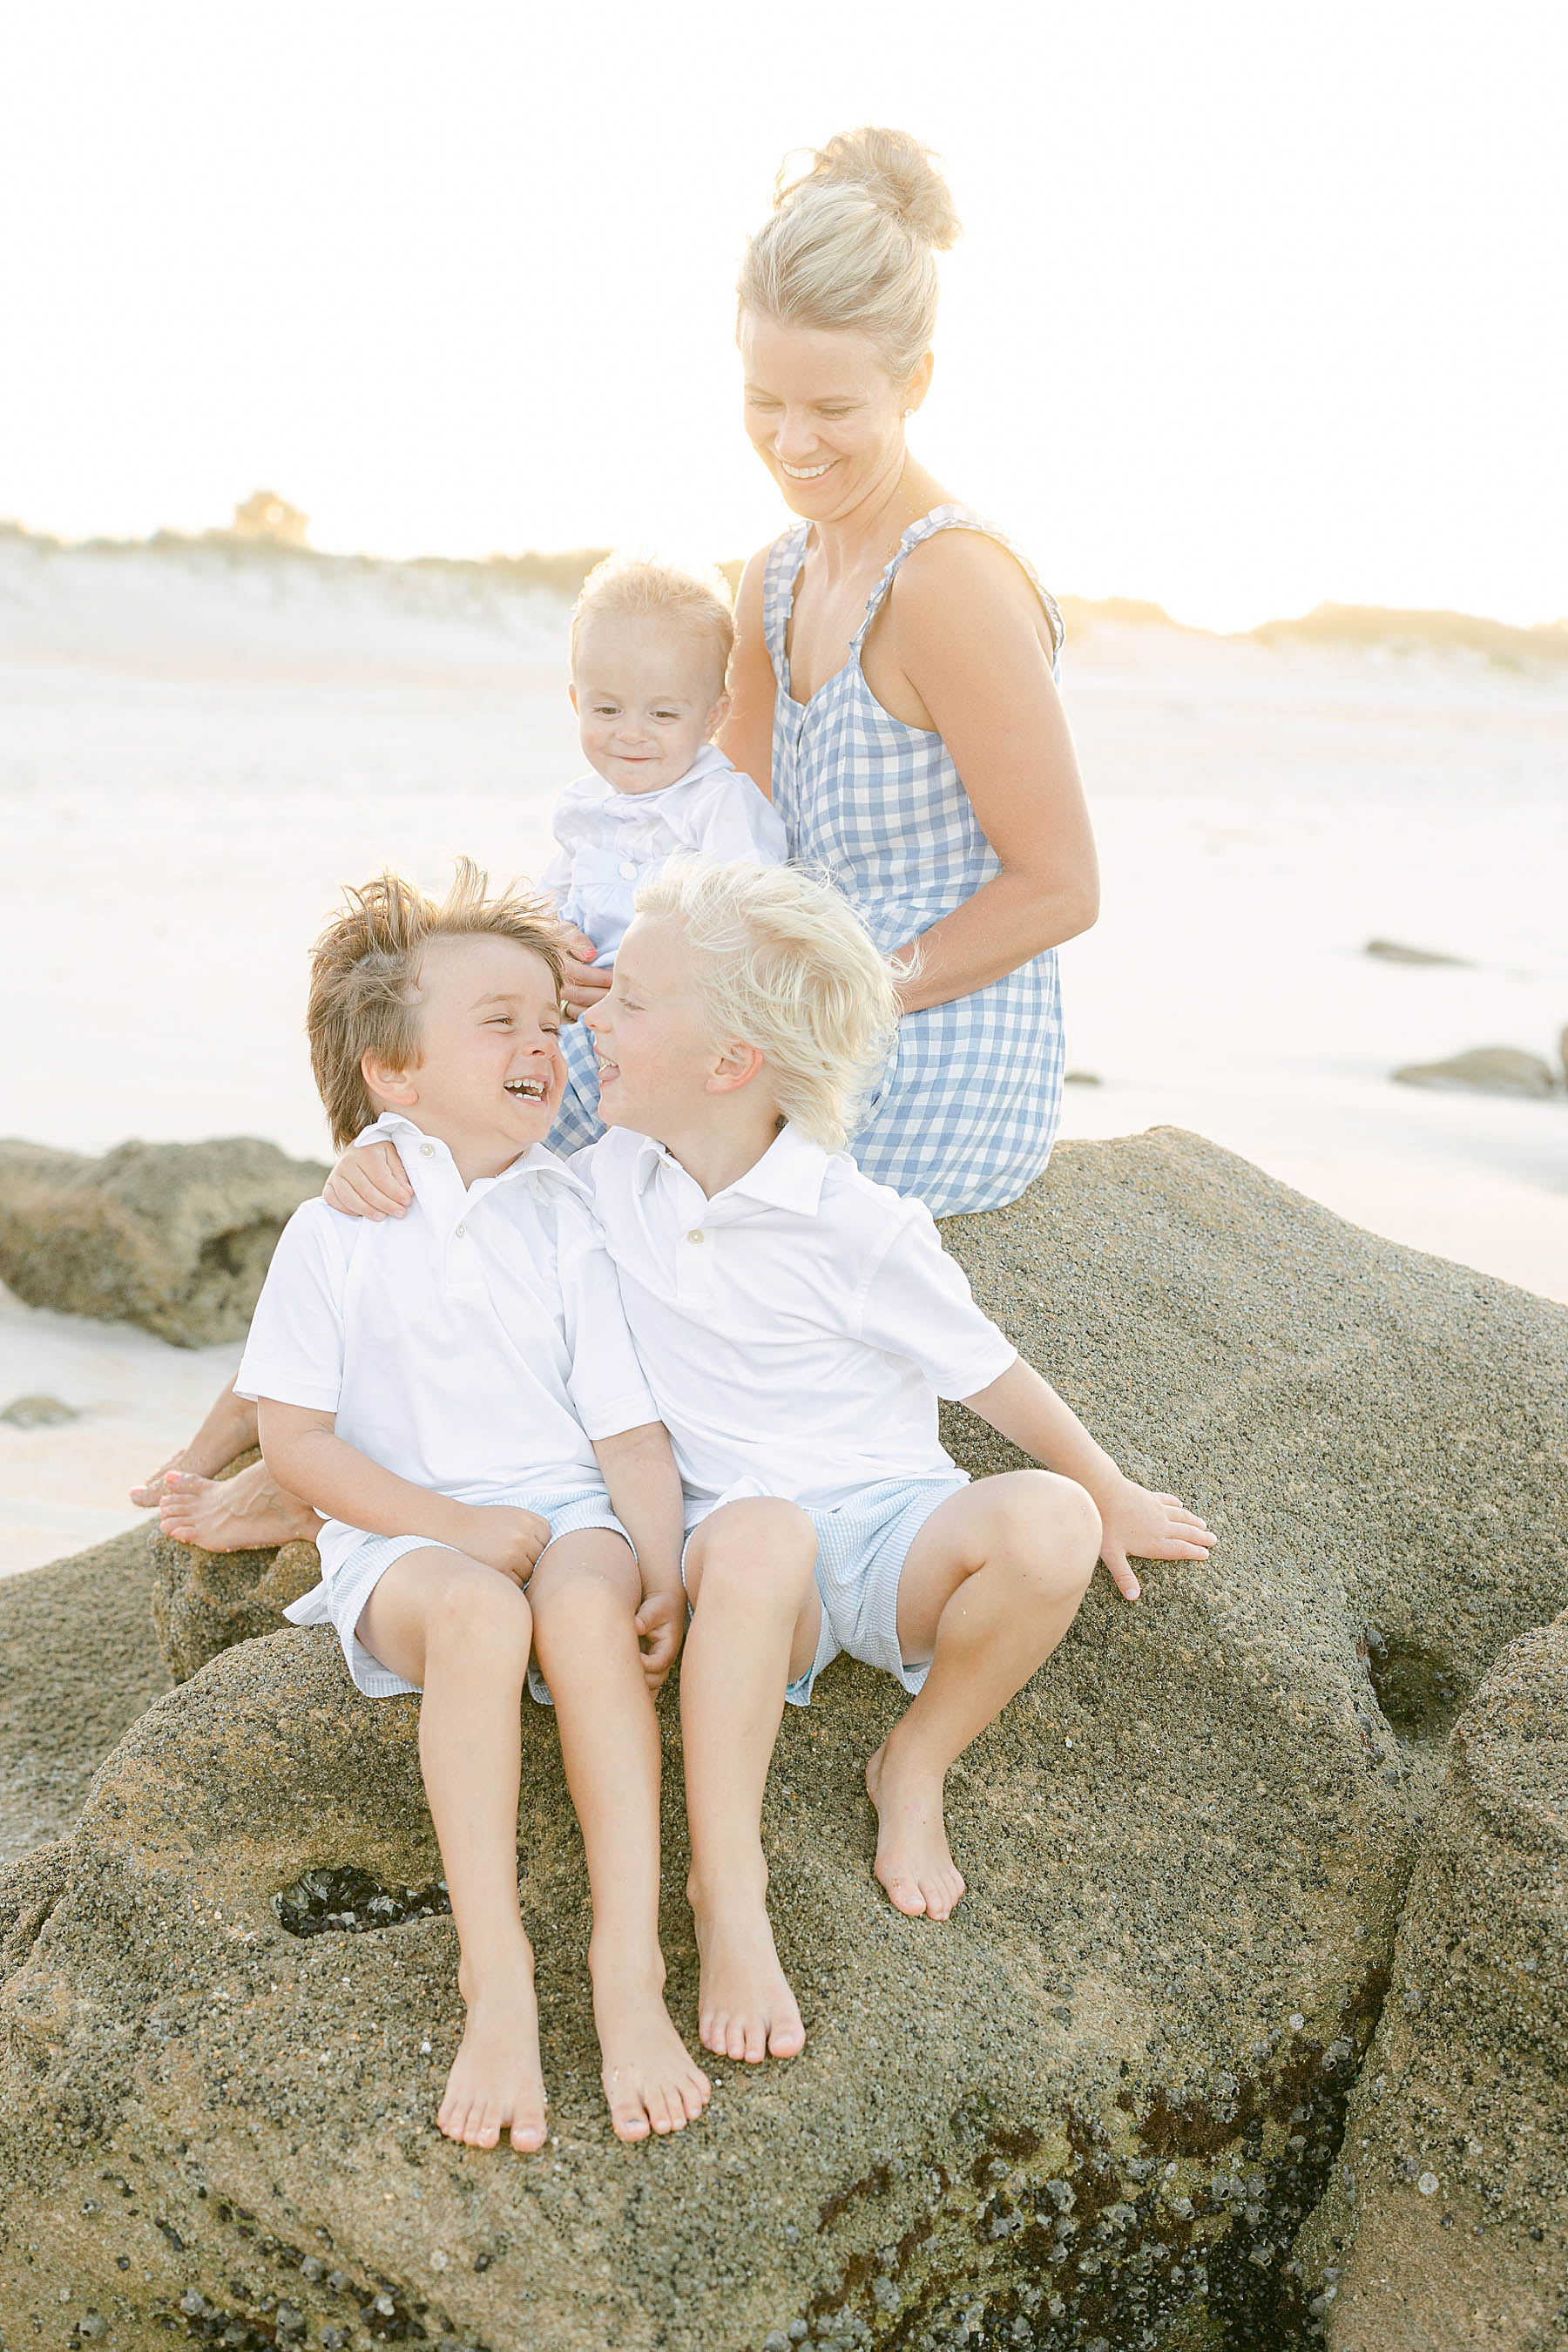 mom with her children on the beach at sunset wearing white